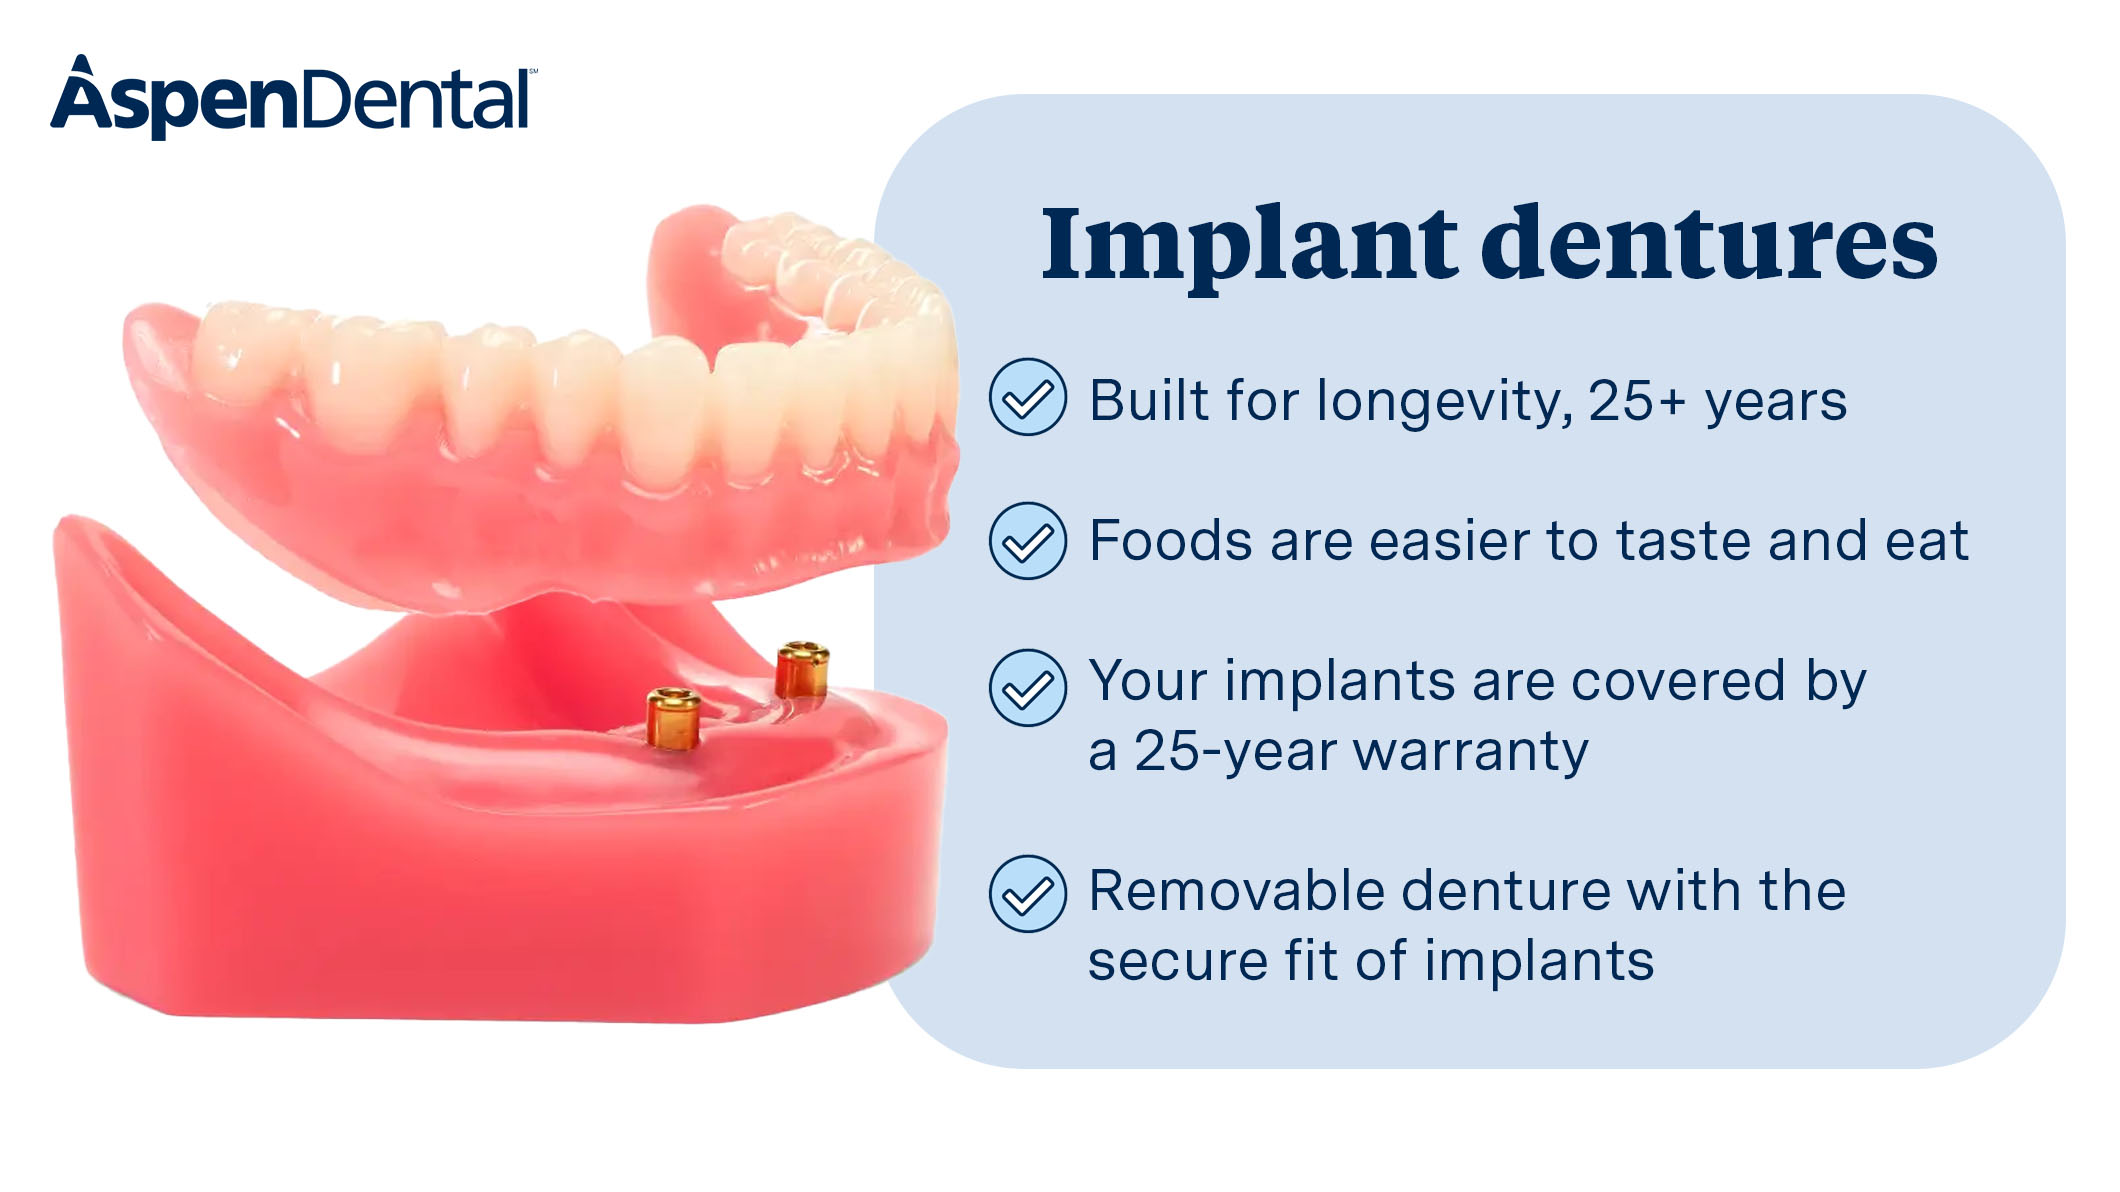 Our implant dentures offer a natural feel and titanium-stabilized security. Easily snaps into place  Aspen Dental - Wichita Falls, TX Wichita Falls (940)249-9089